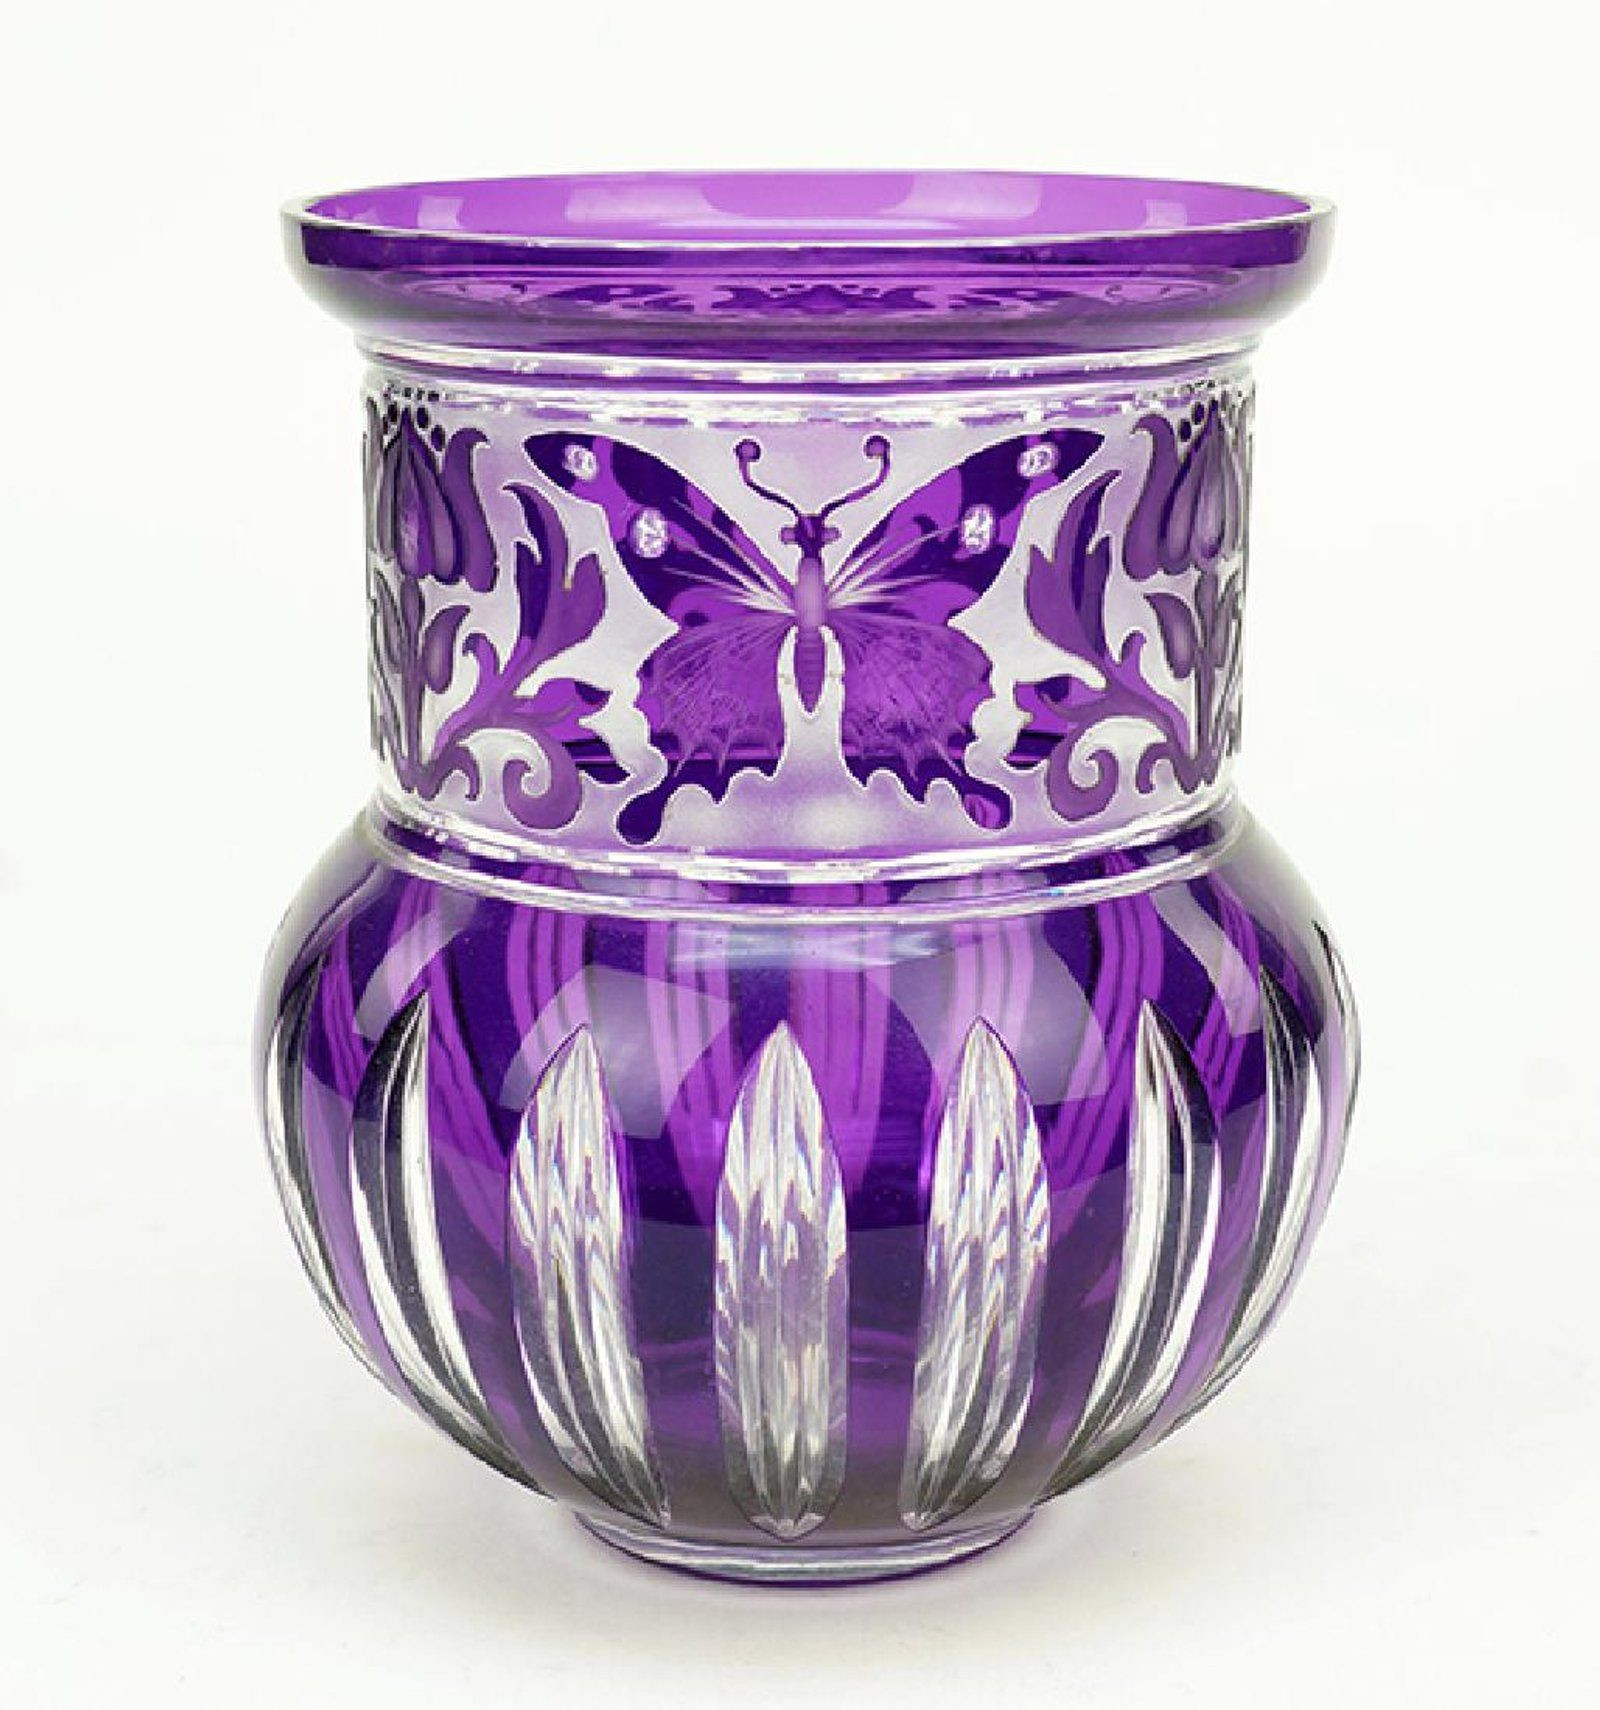 25 Popular 36 Glass Vase 2024 free download 36 glass vase of a val st lambert vase on glassies belgium val st lambert with a val st lambert vase purple cameo glass vase with floral and butterfly decoration